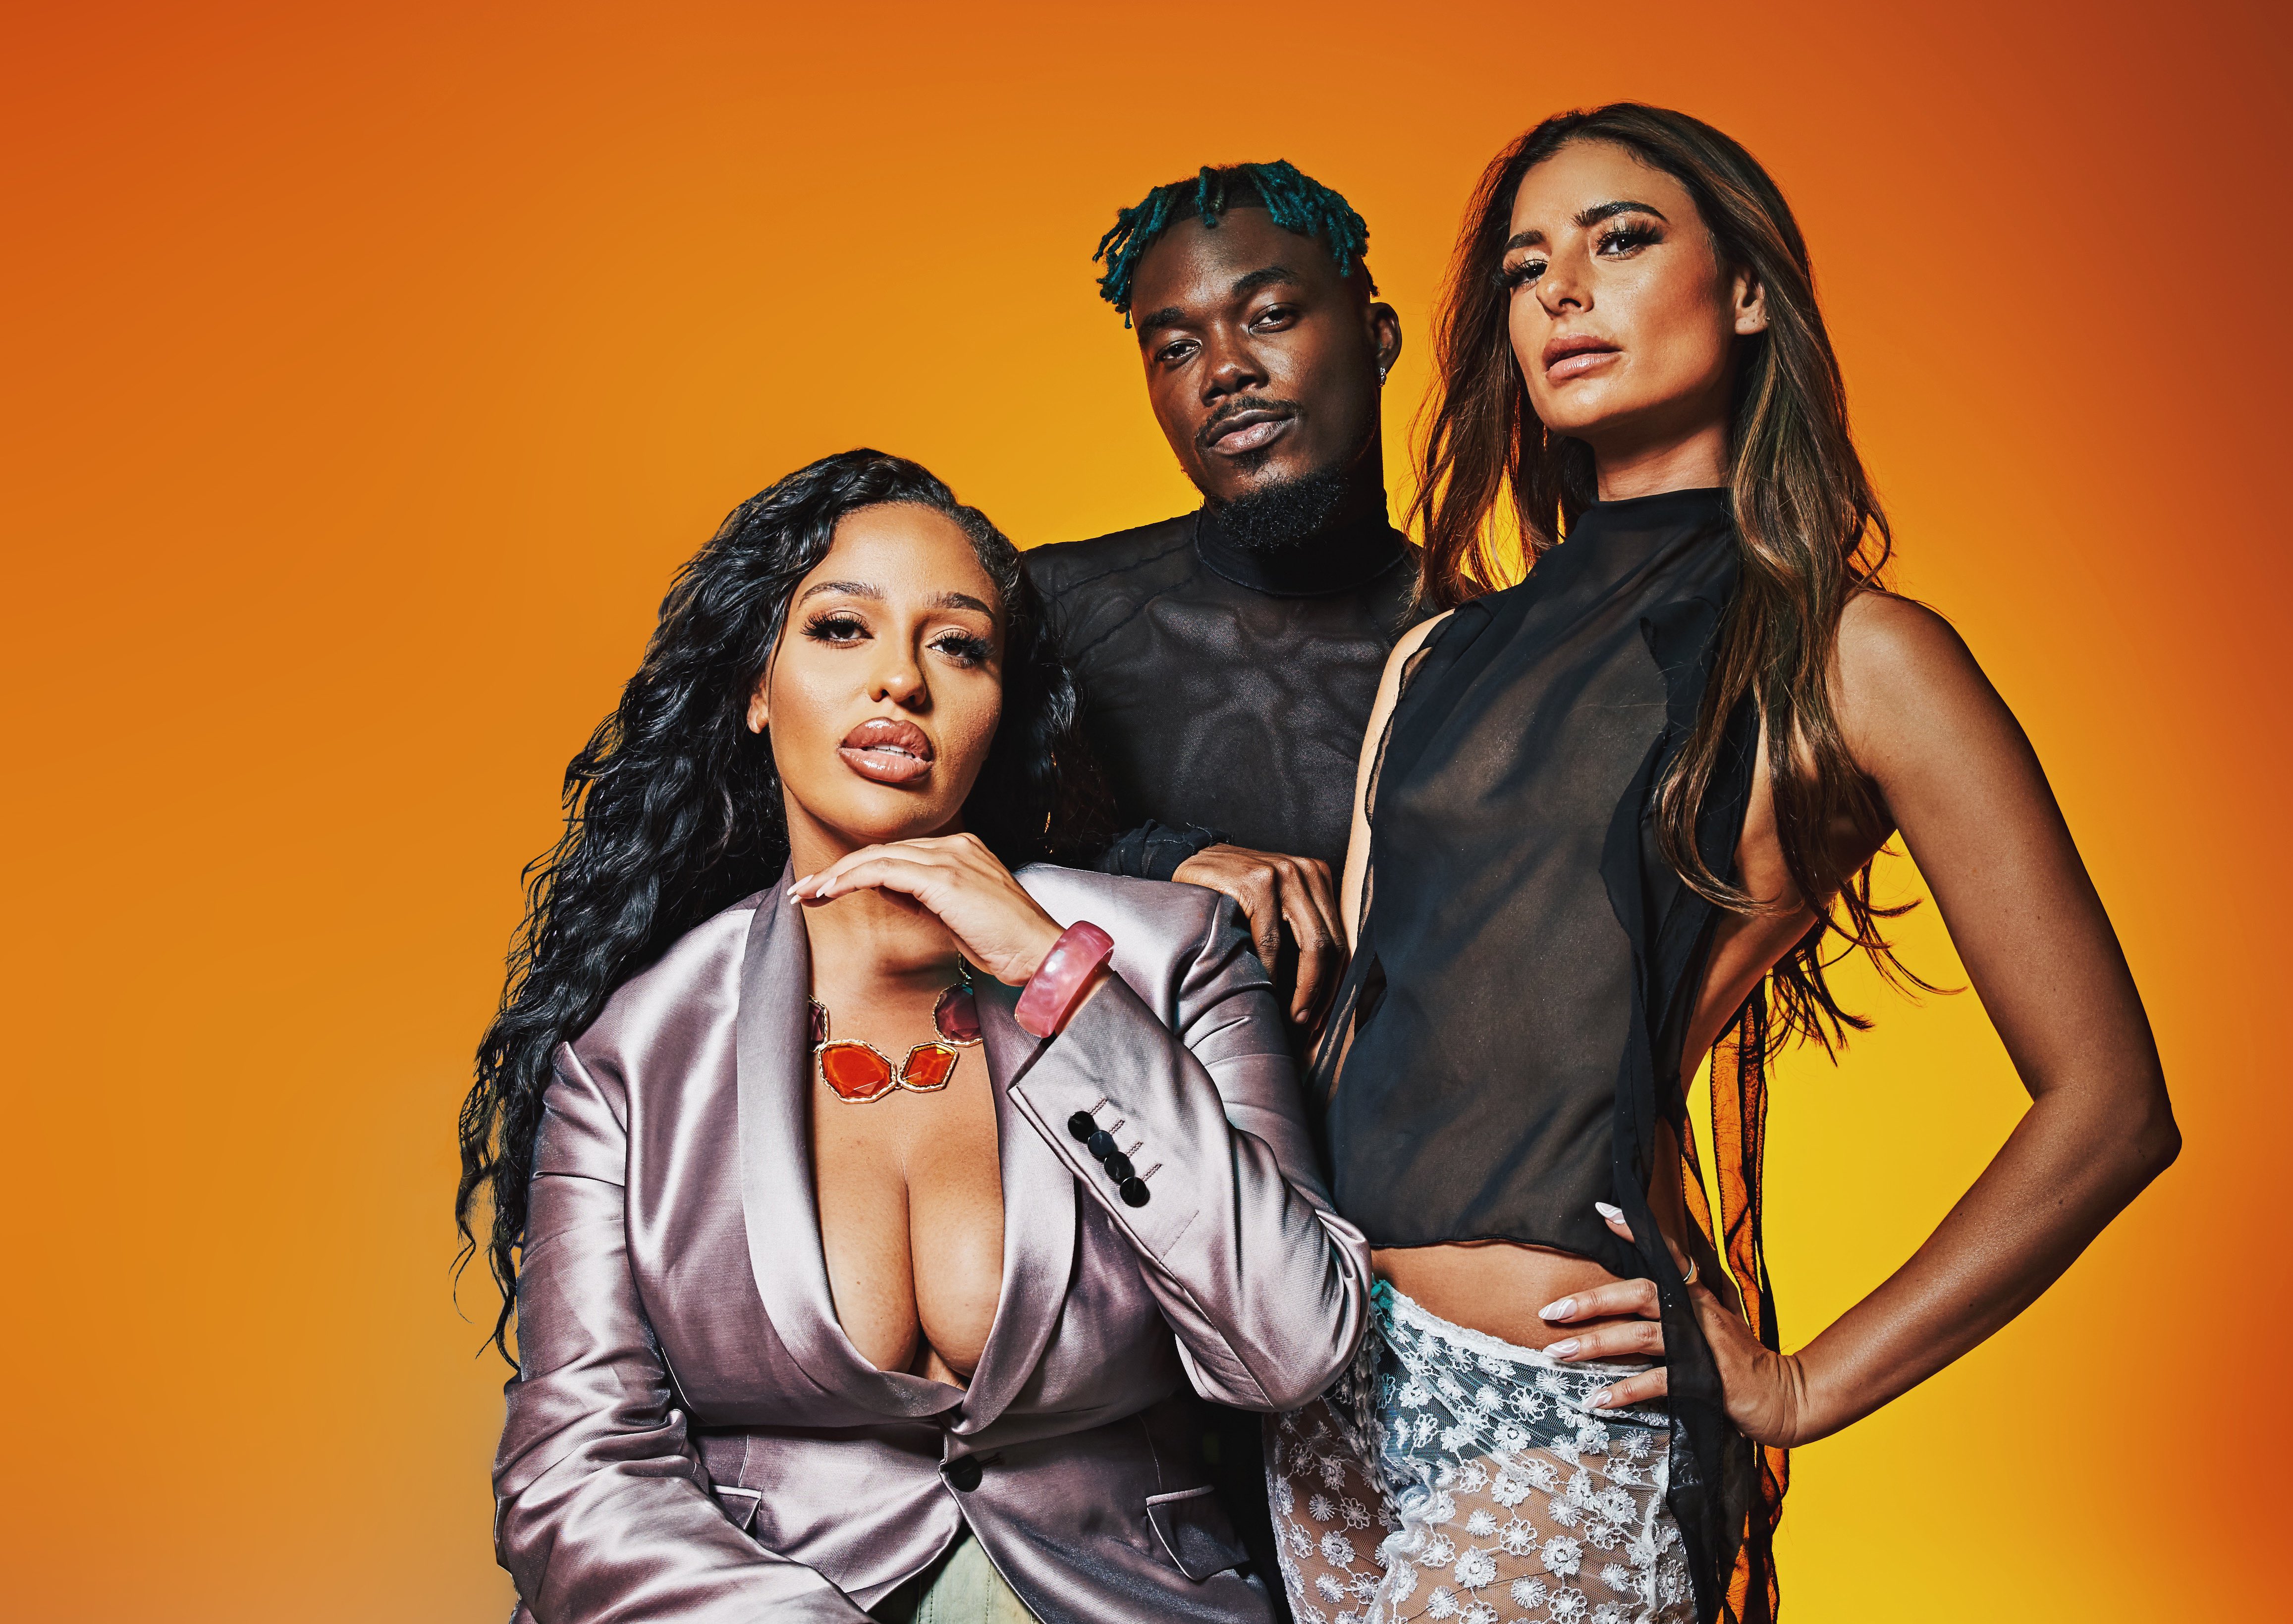 Promotional photo for "Taxi Man" in collaboration with Vybz Kartel which sees Camidoh posing behind Miss Ladamilia and DJ Lara Fraser.